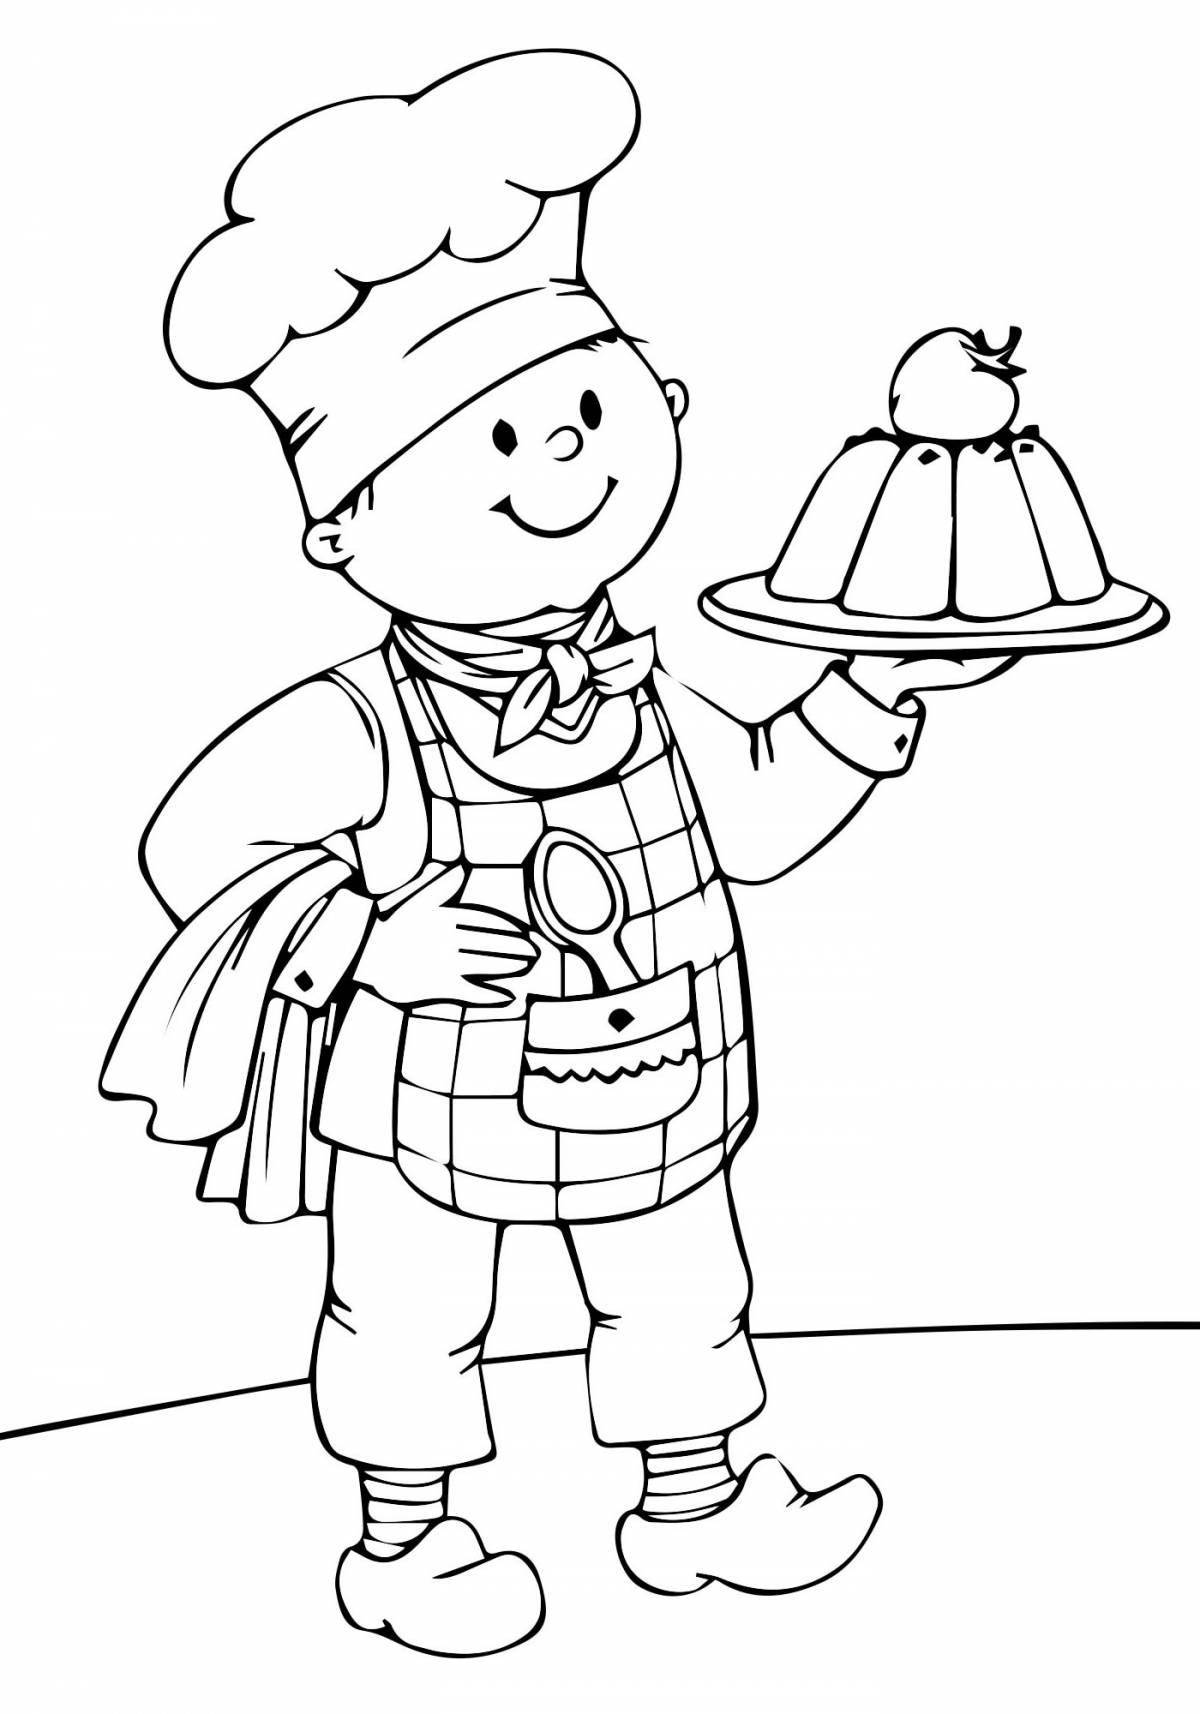 Colorful cook coloring page for 6-7 year olds